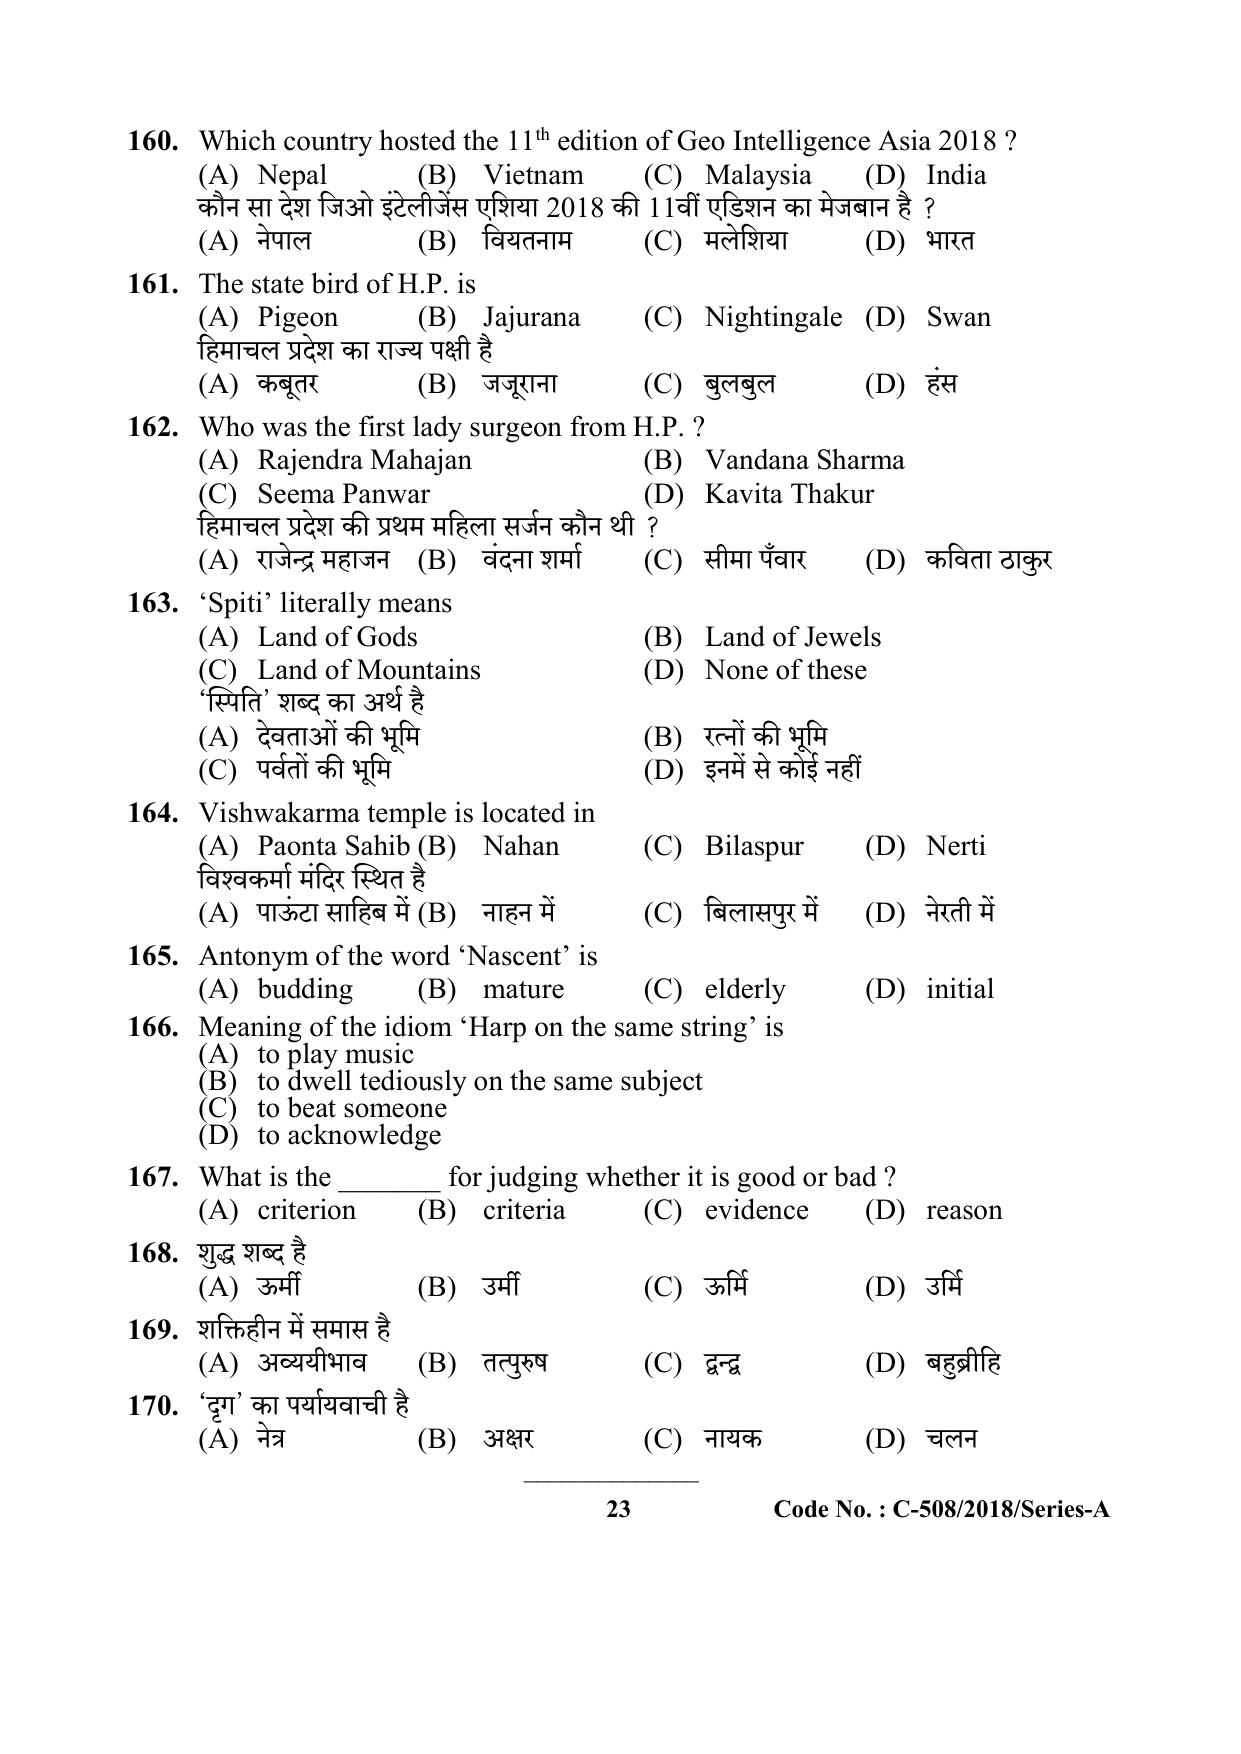 UP Health Worker Thematic Knowledge Previous Year Question Paper - Page 23